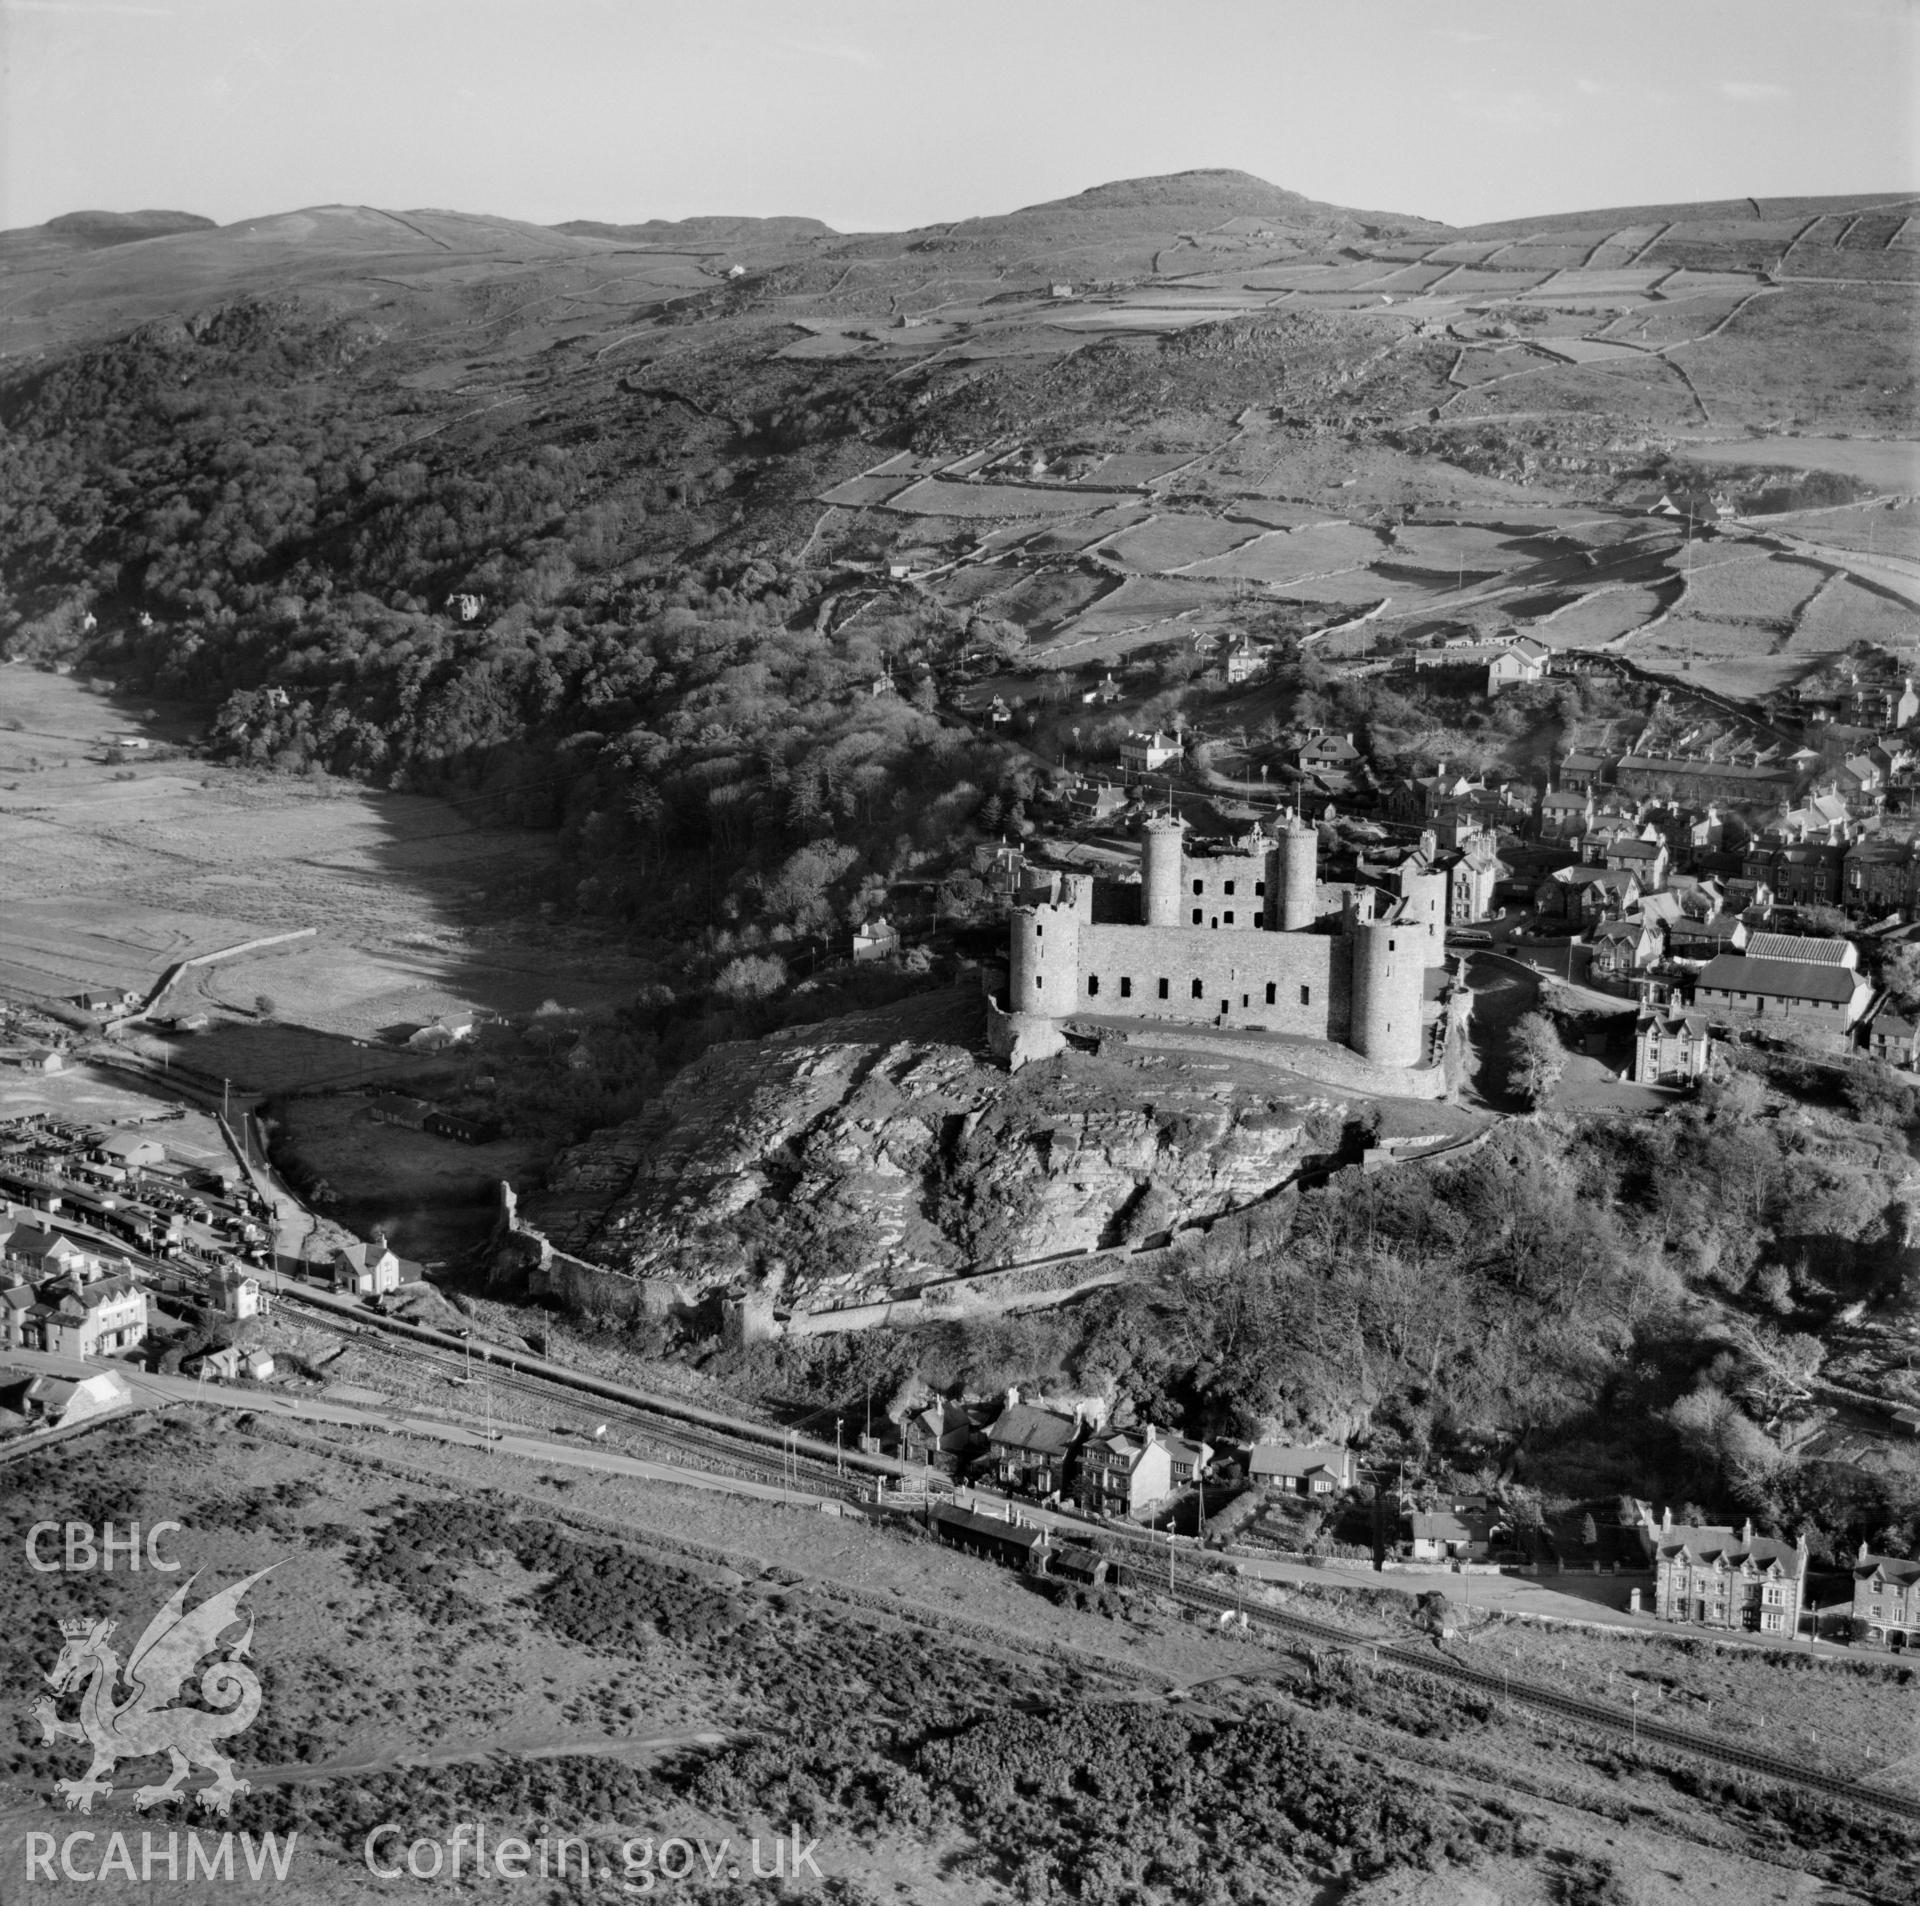 View of Harlech showing castle